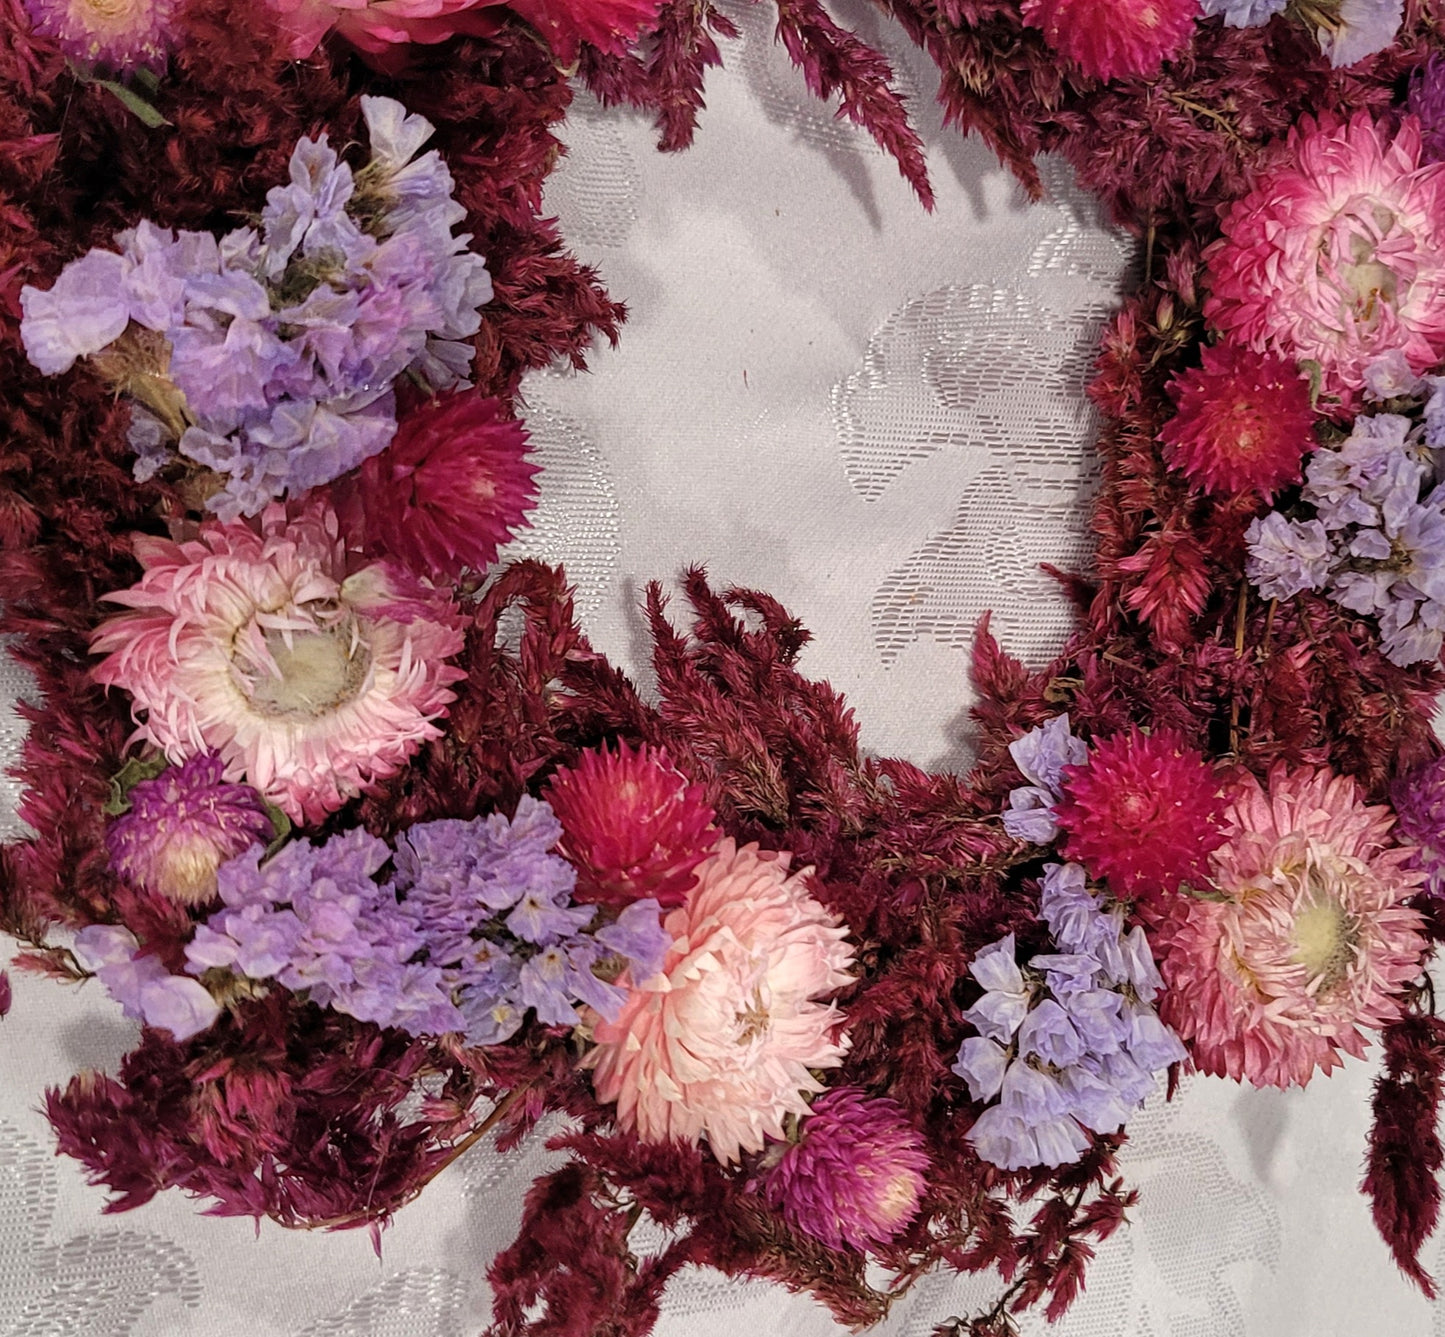 Burgundy, Pink and Lavender Wreath